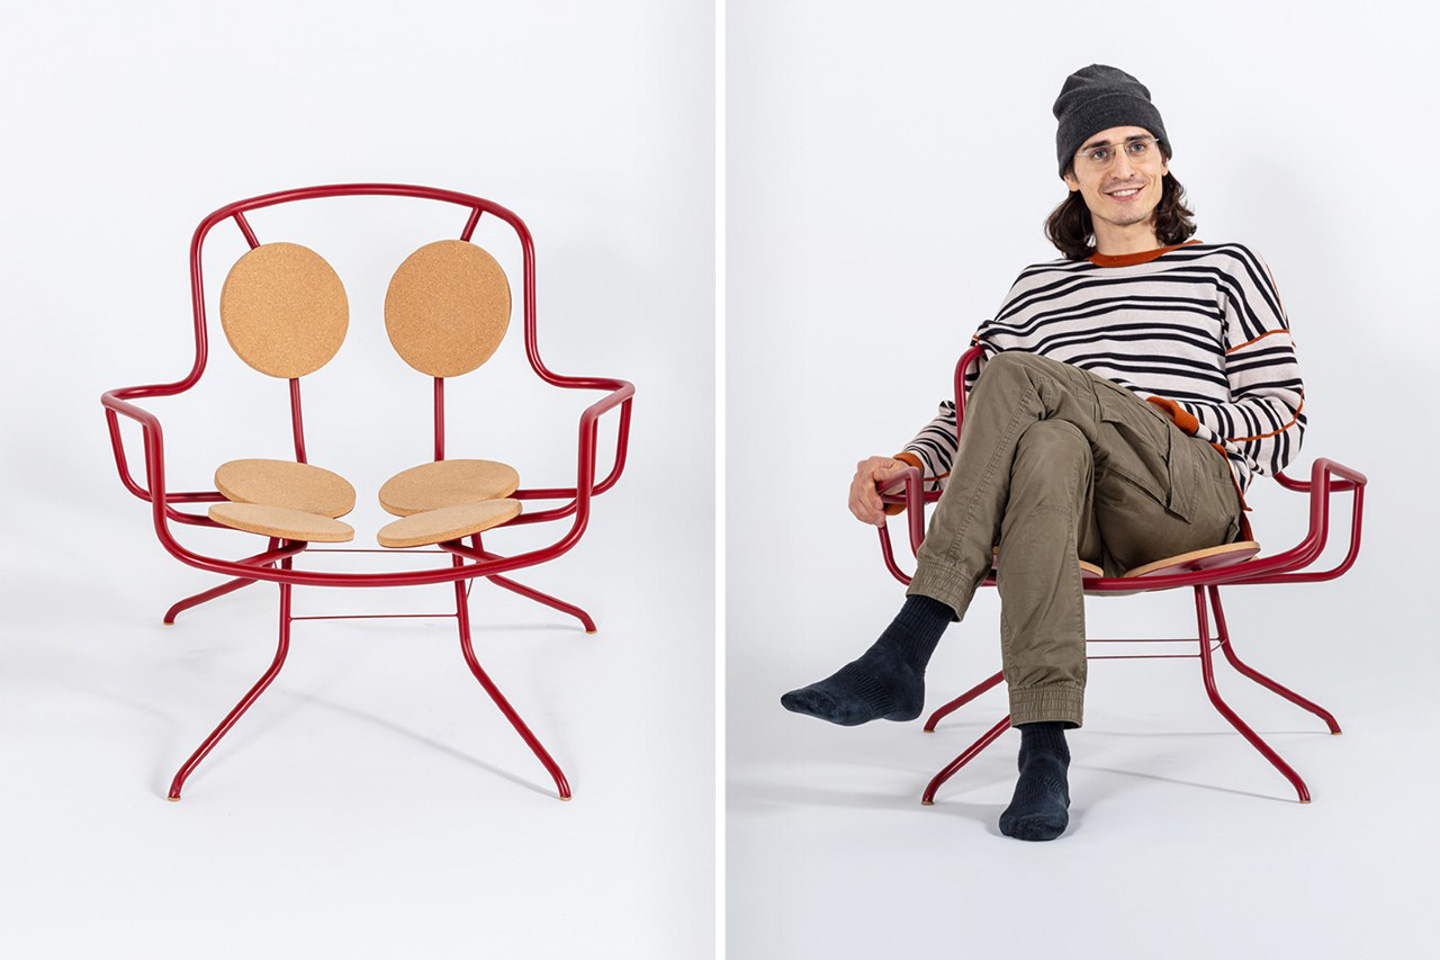 #This unconventional seating device challenges the notion of what a chair should look like